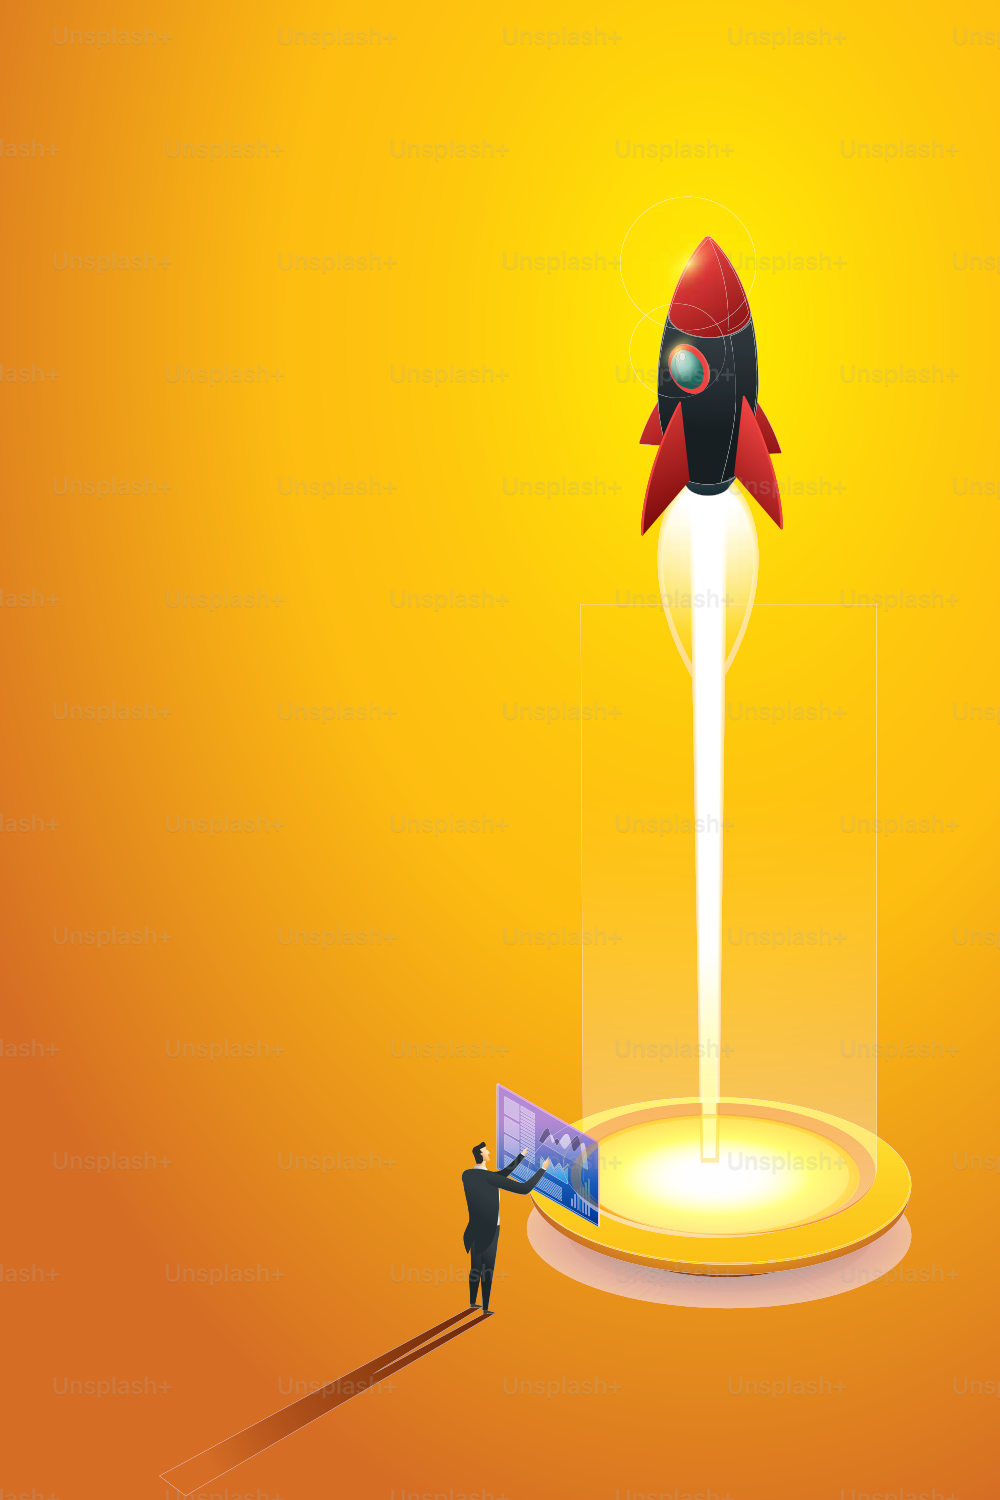 Startup business man launching a rocket analysis his company growth. isometric concept. illustration Vector